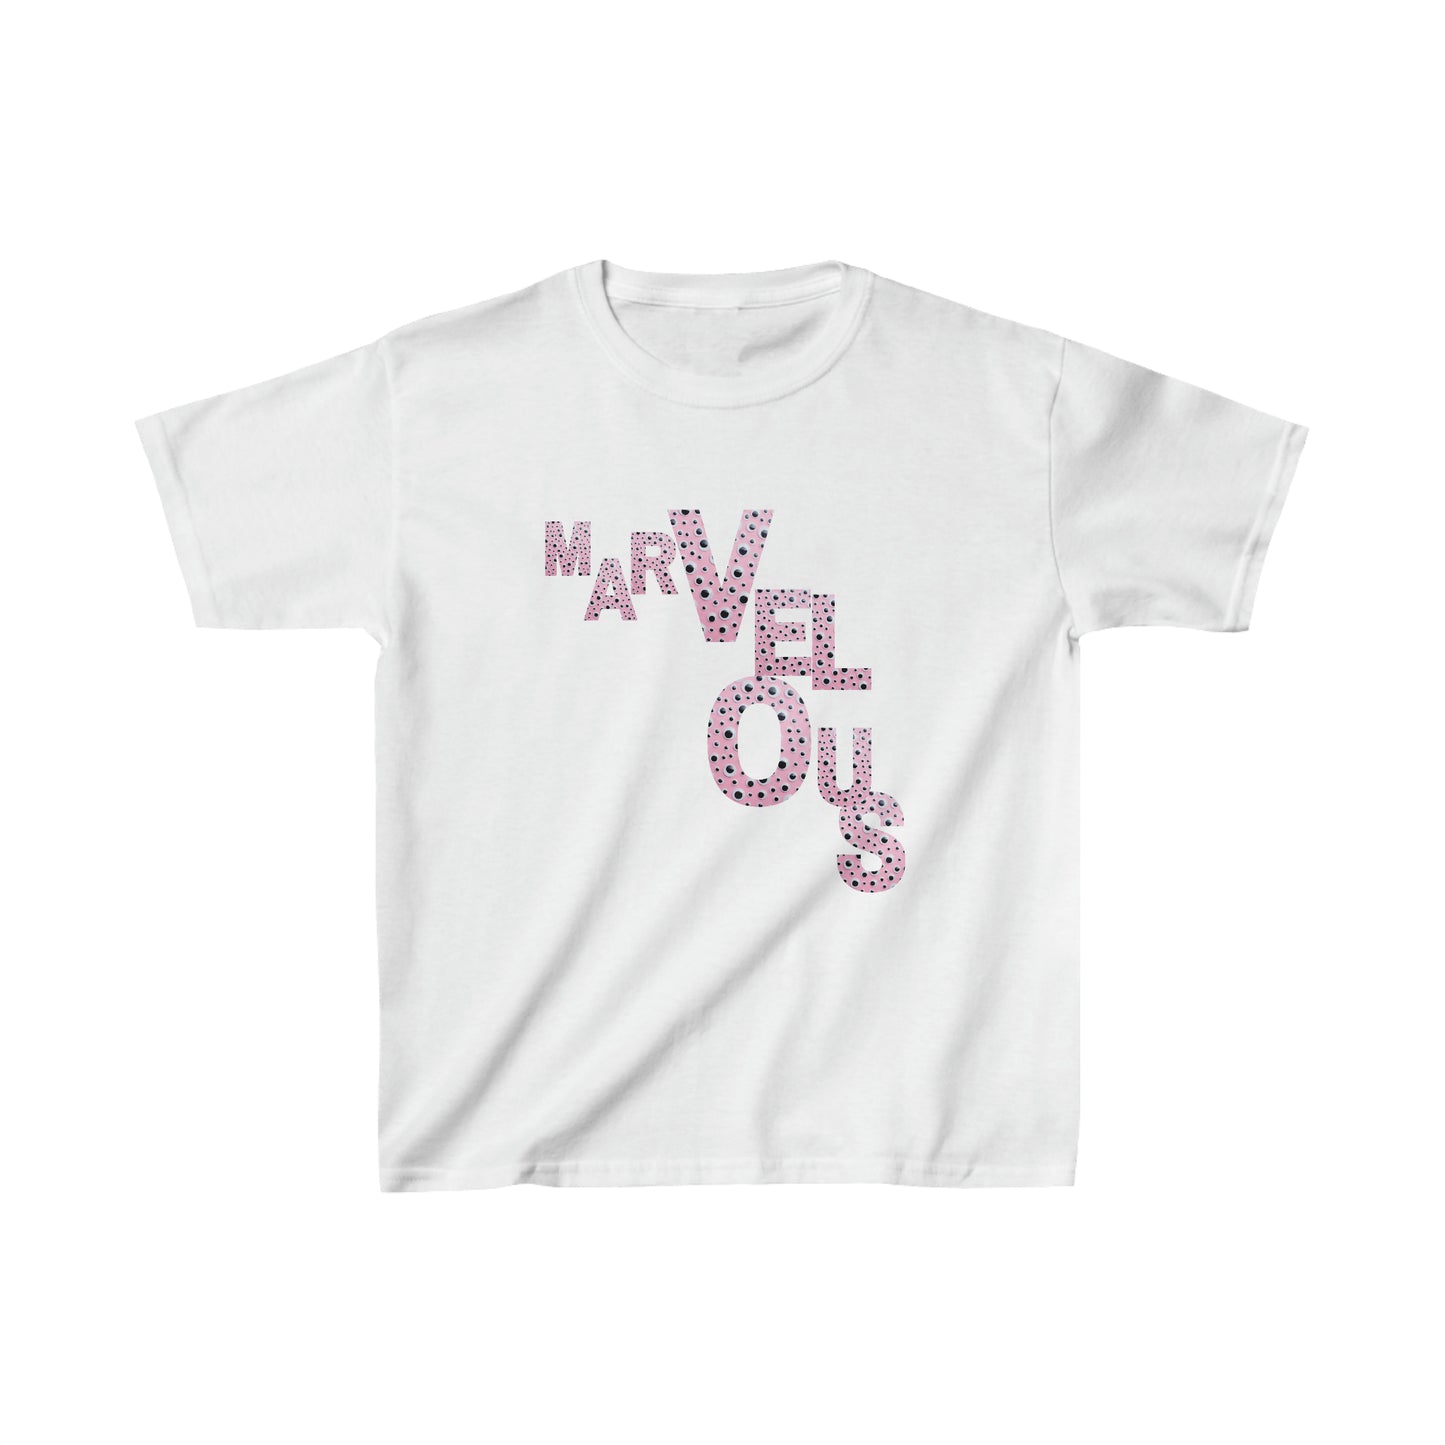 Marvelous  kid t shirt, t shirt gift for your precious child, T shirt gift from parents to kids